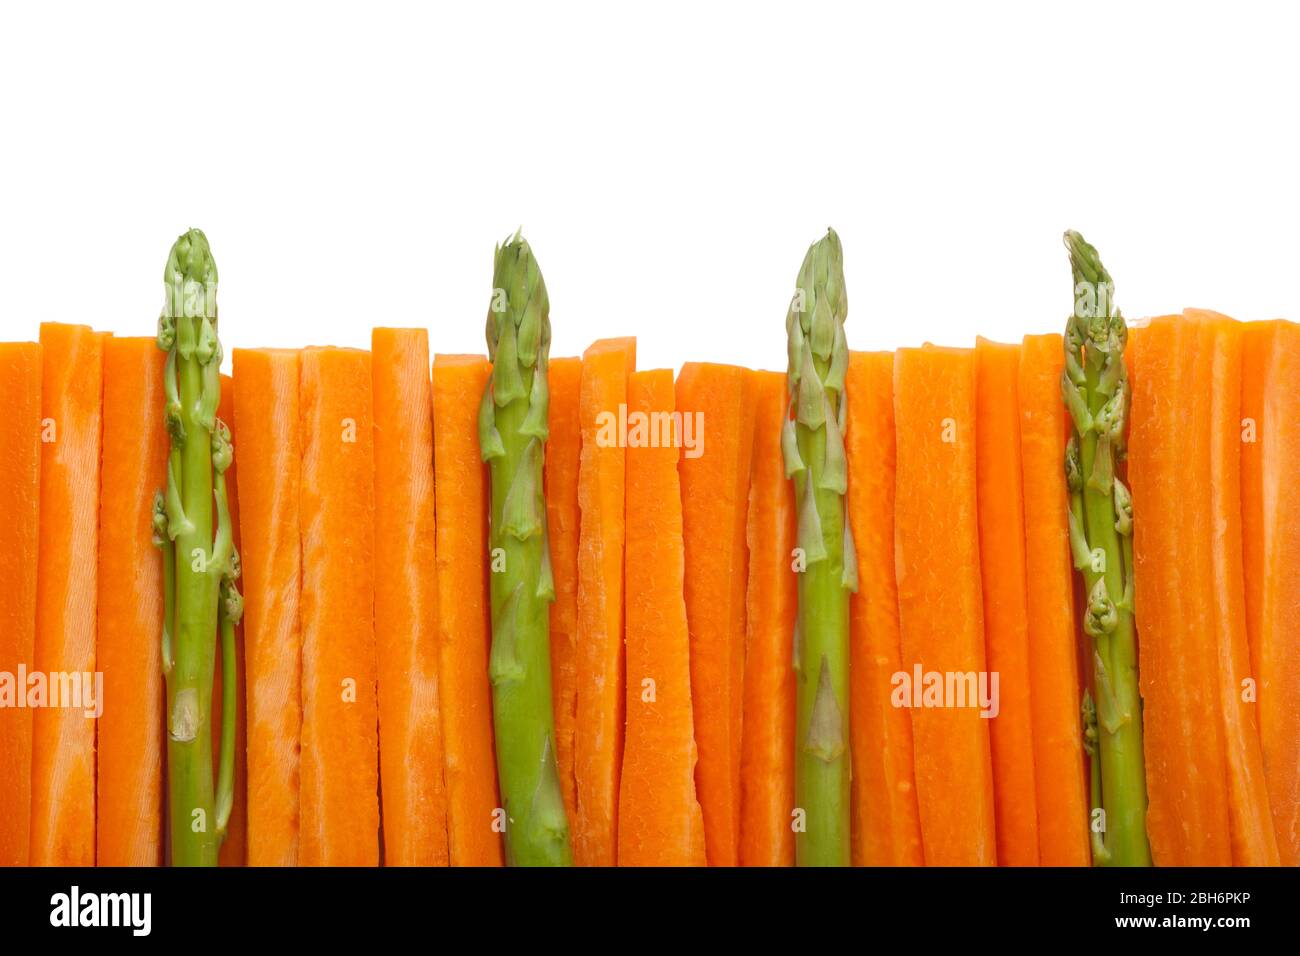 Fence made of carrot sticks and asparagus isolated on white background Stock Photo